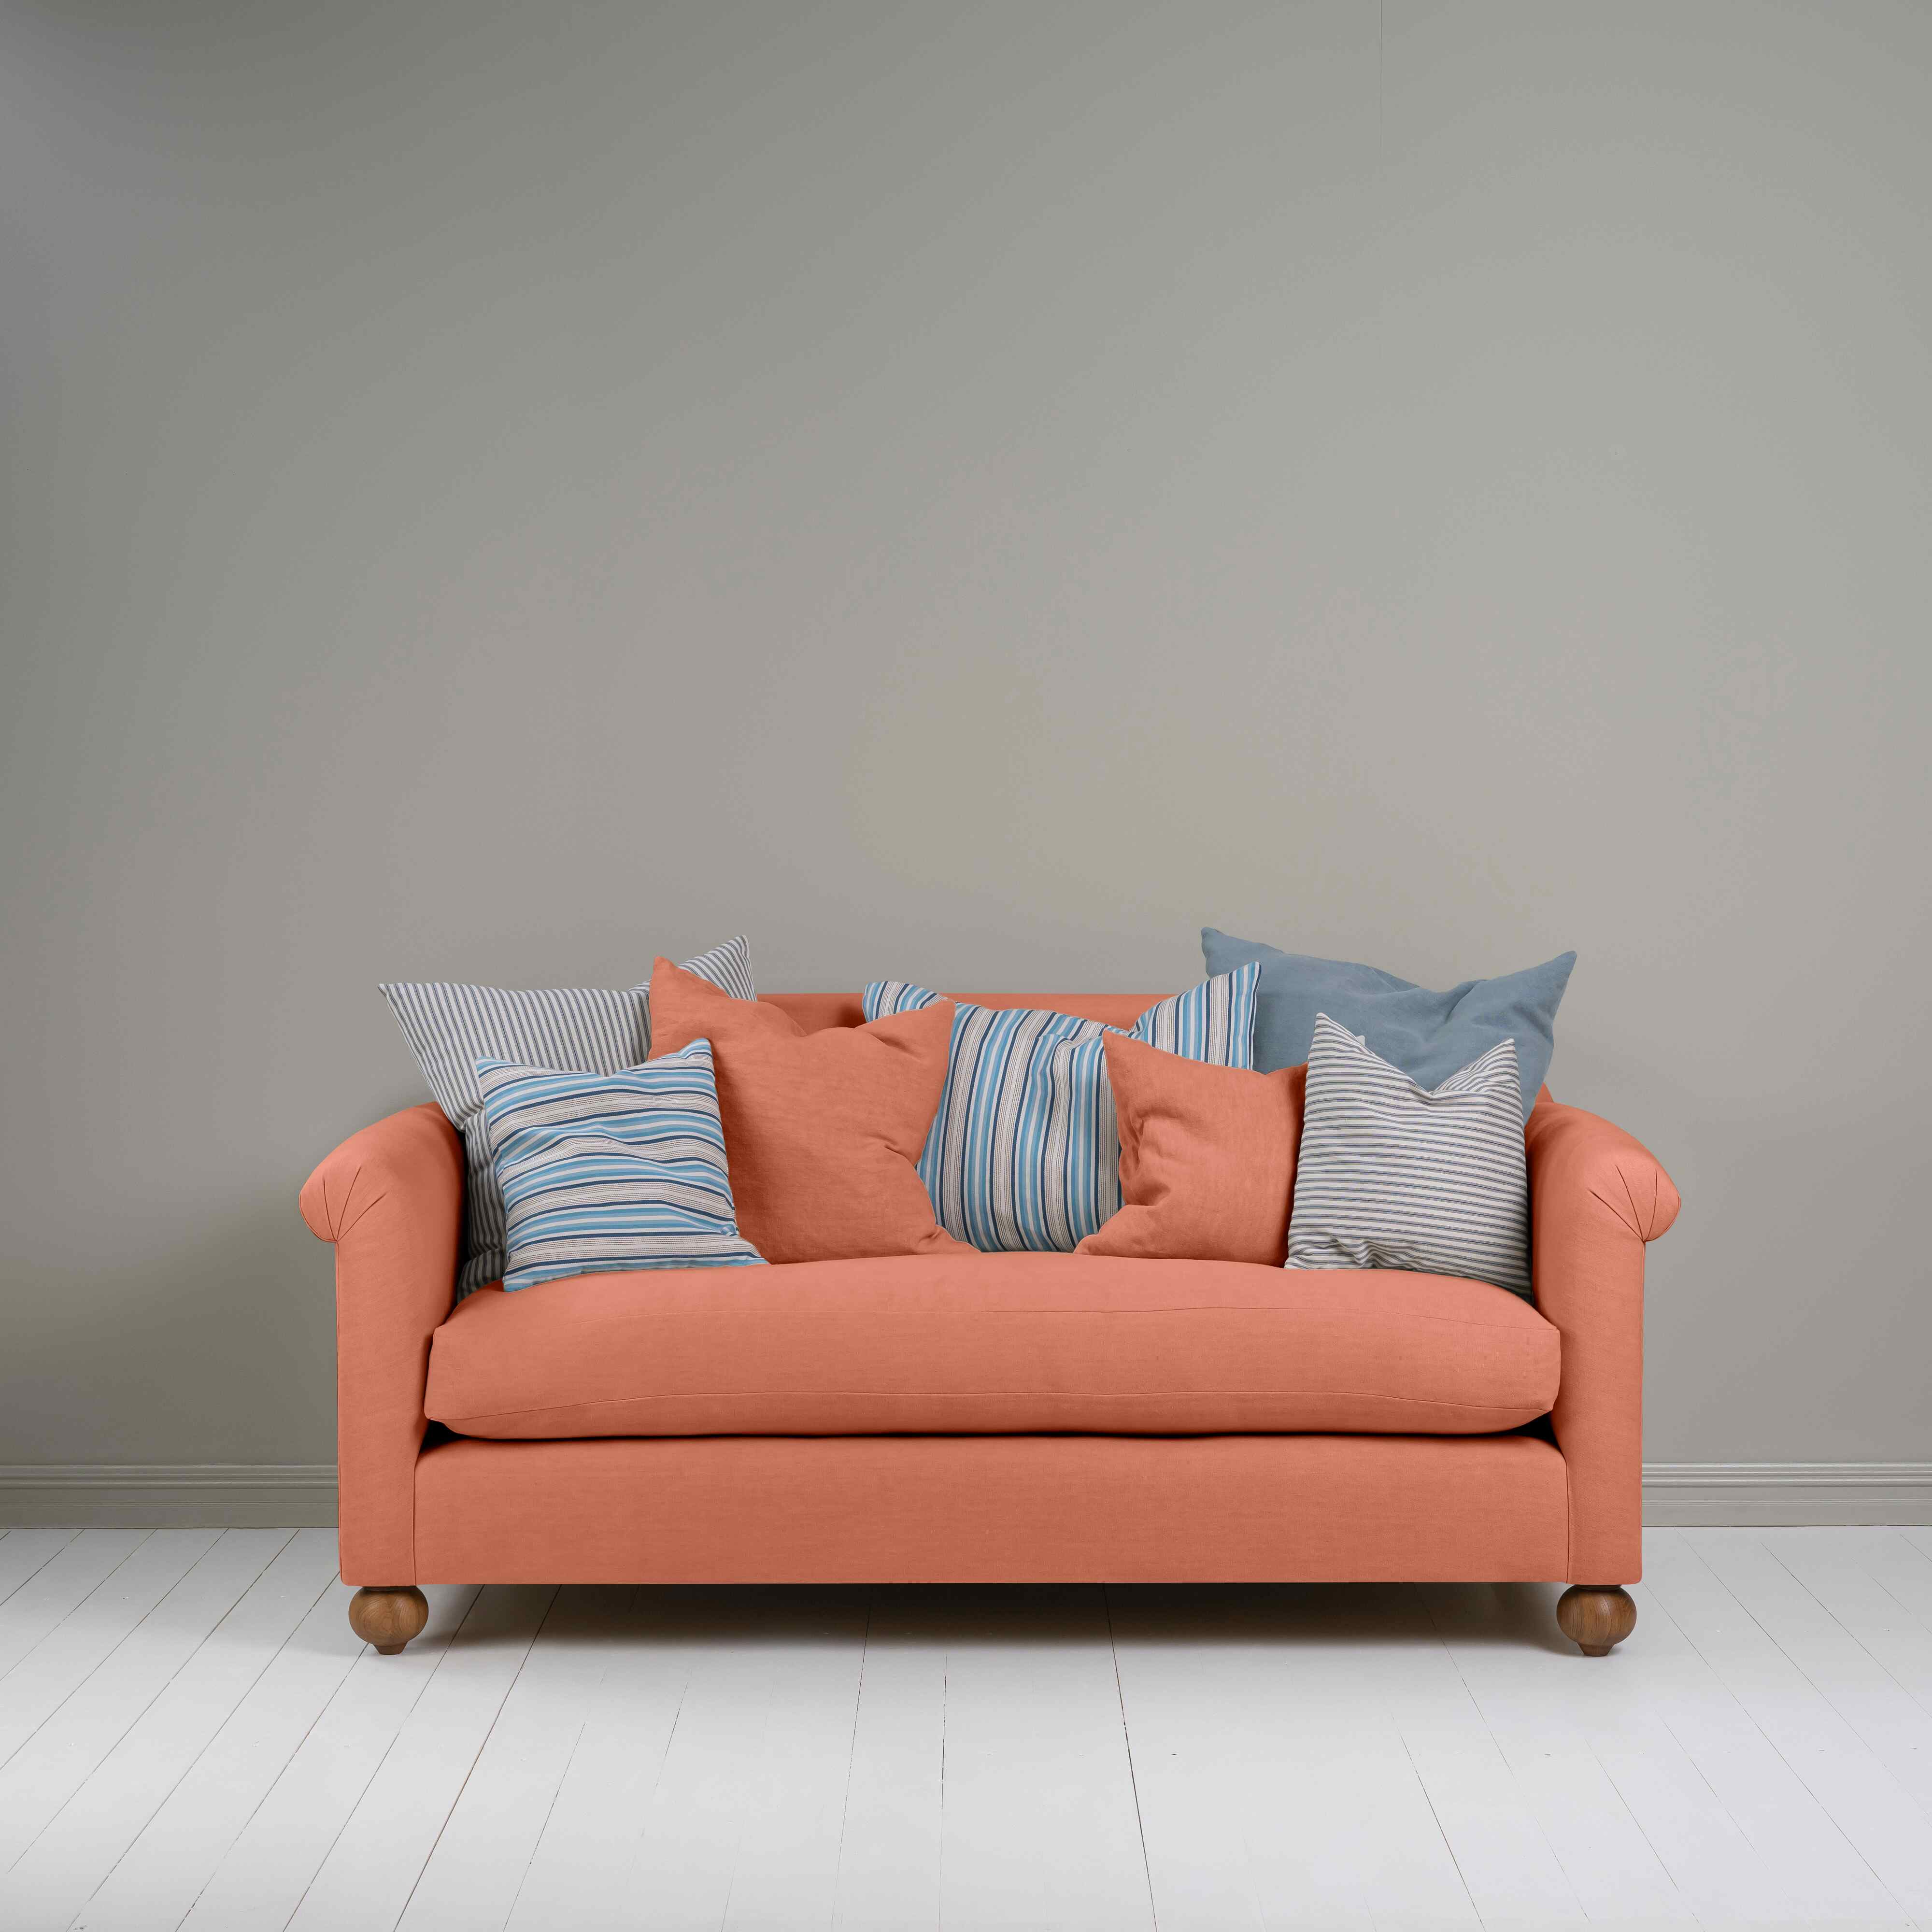  Dolittle 3 Seater Sofa in Laidback Linen Cayenne 